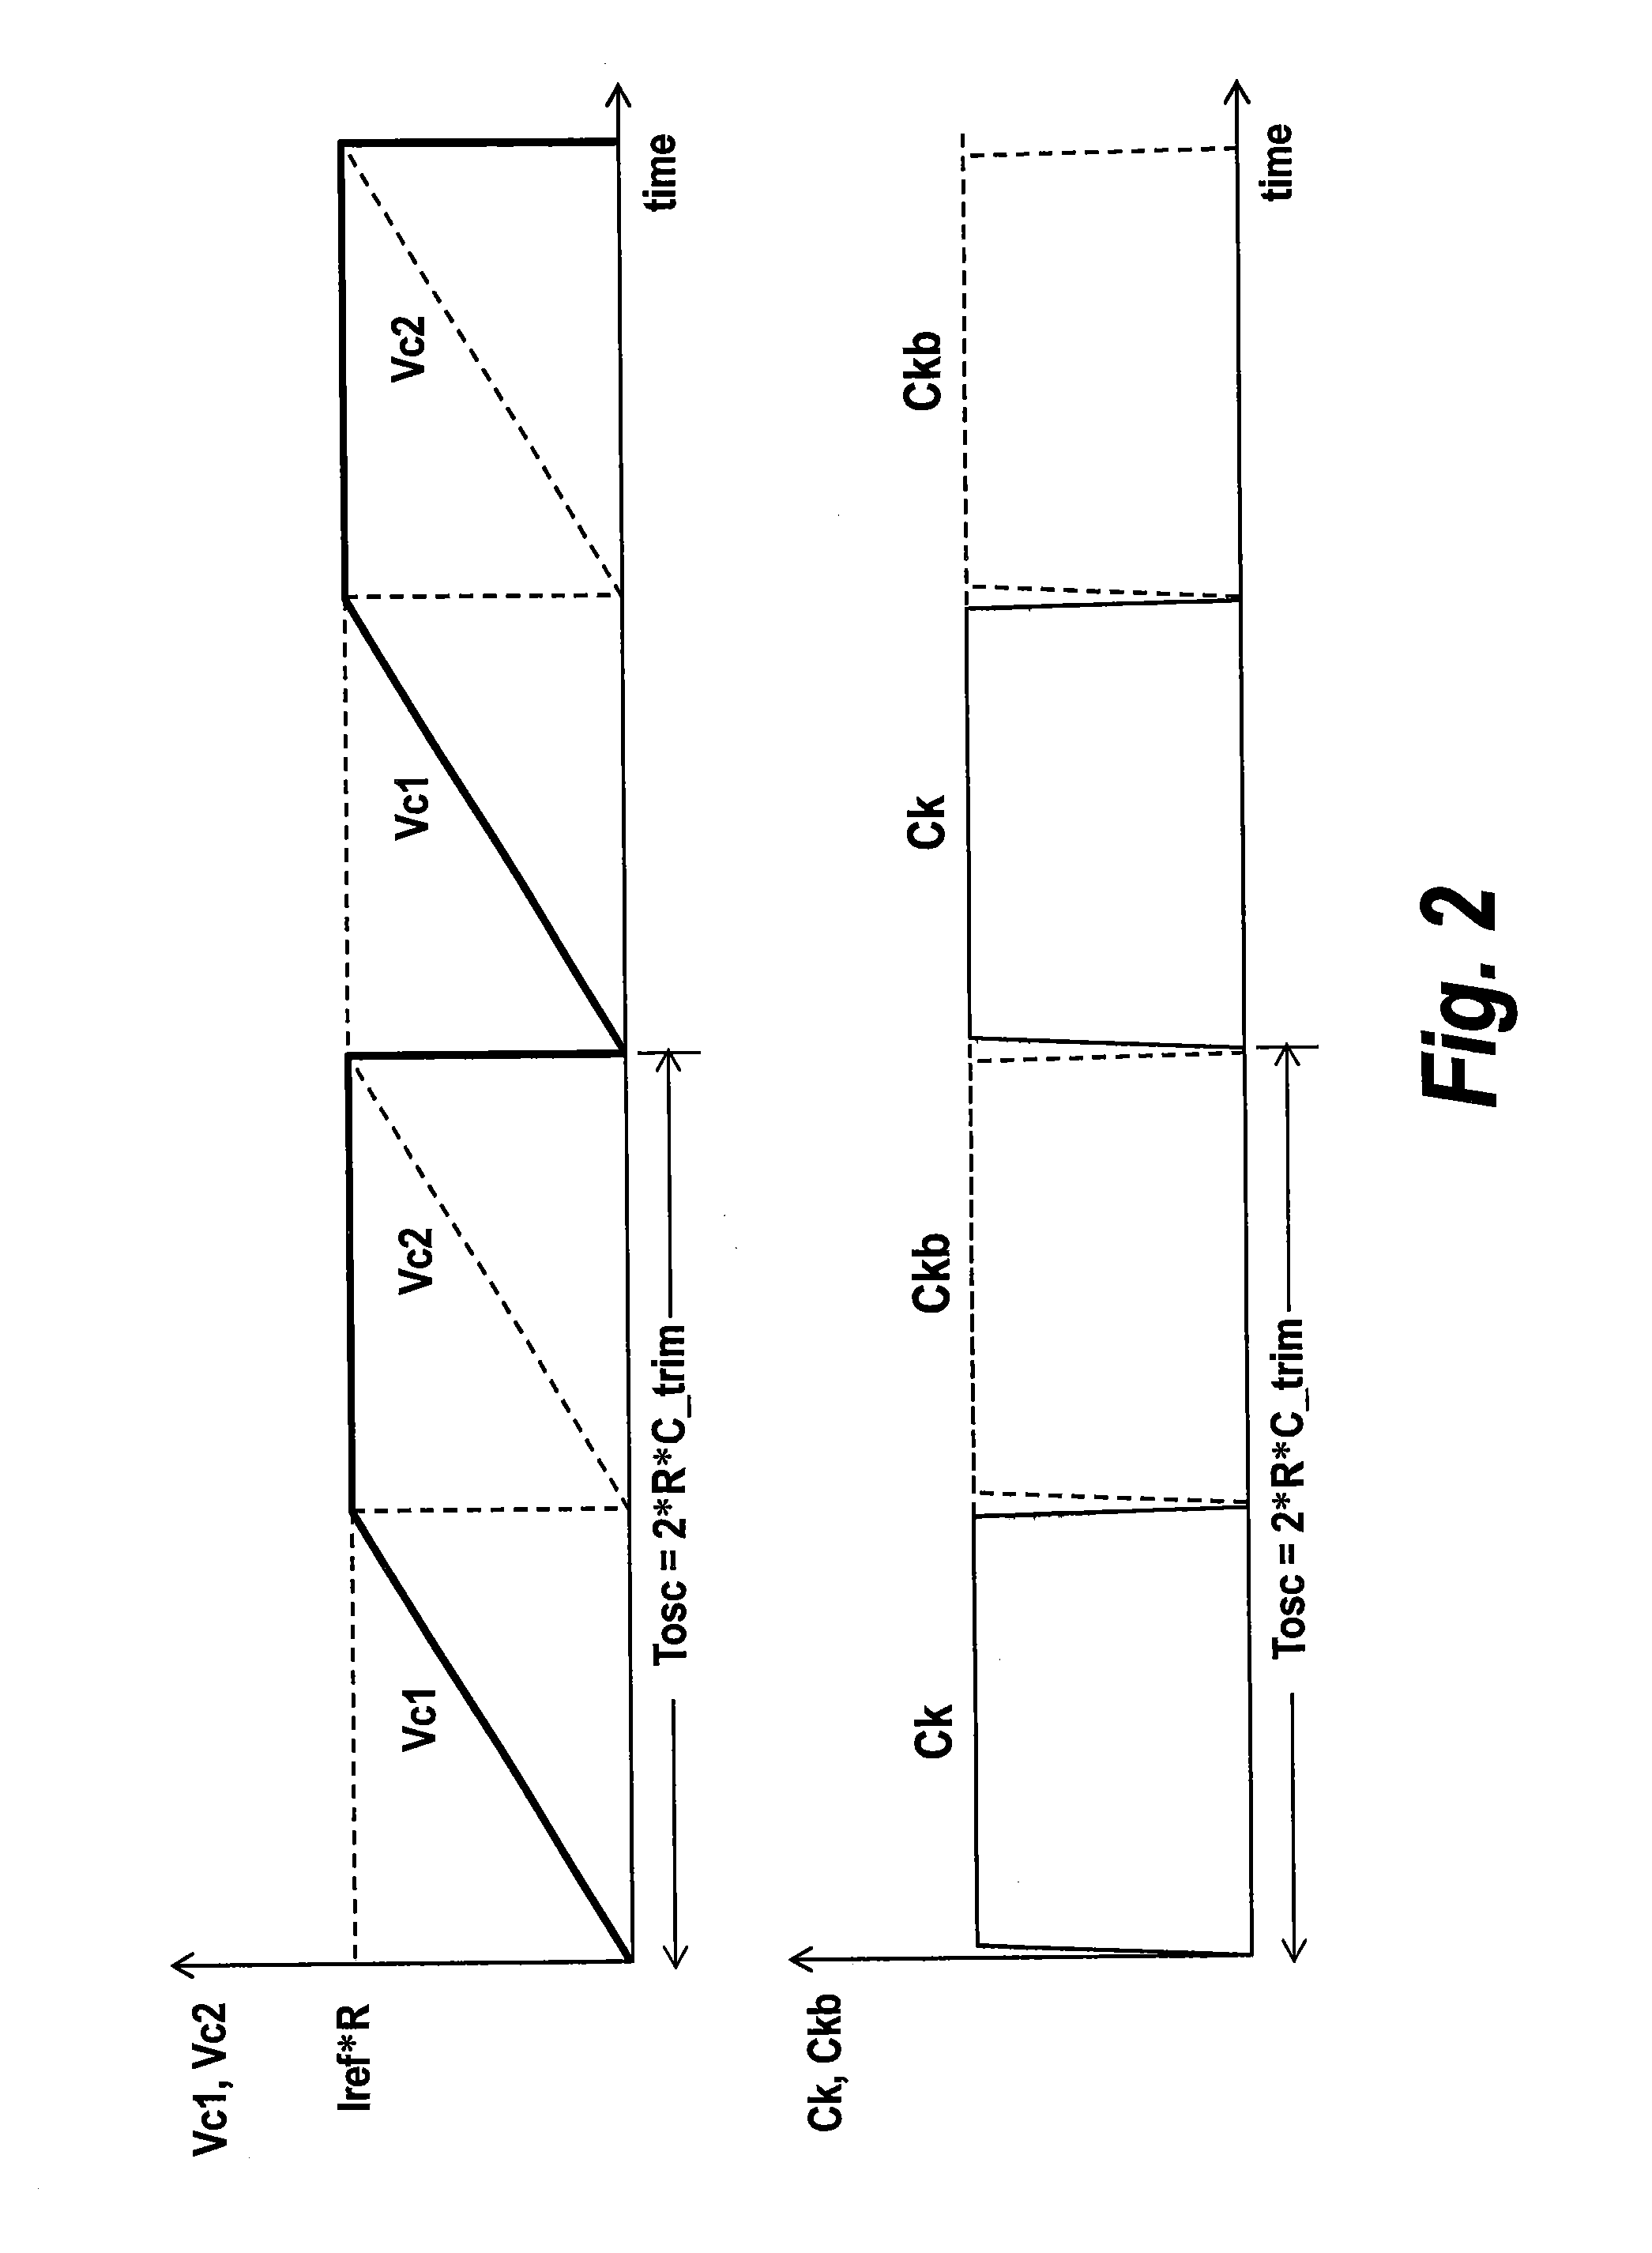 Integrated circuit devices having oscillator circuits therein that support fixed frequency generation over process-voltage-temperature (PVT) variations